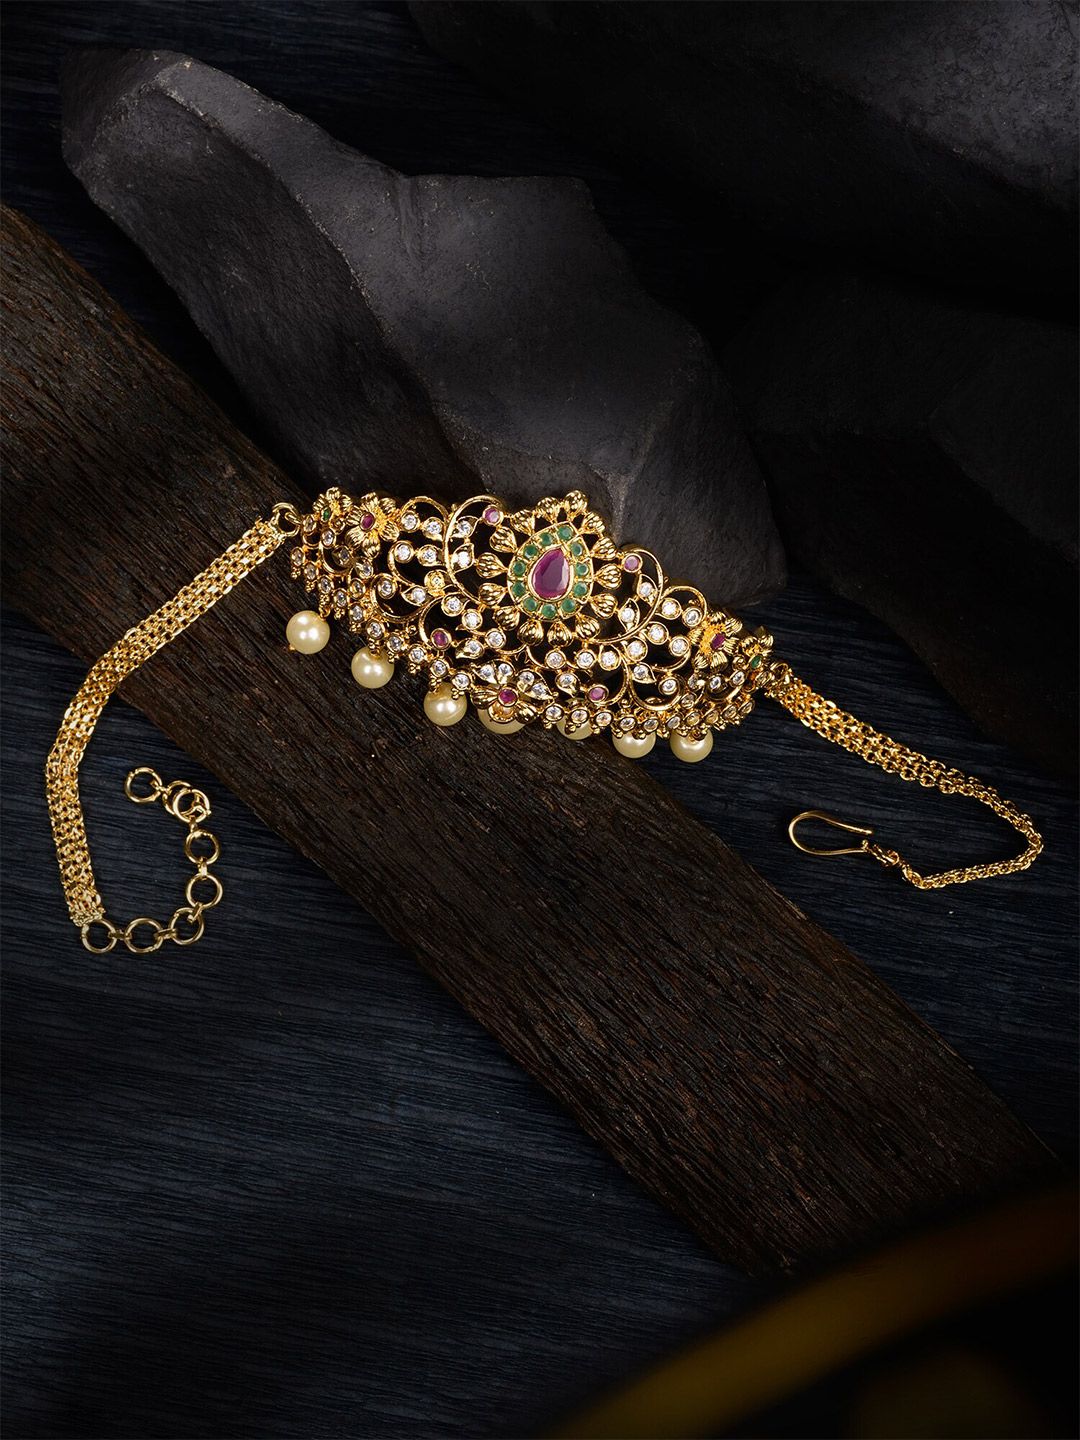 Saraf RS Jewellery Women Gold-Toned AD Studded & Pearl Beaded  Armlet Bracelet Price in India